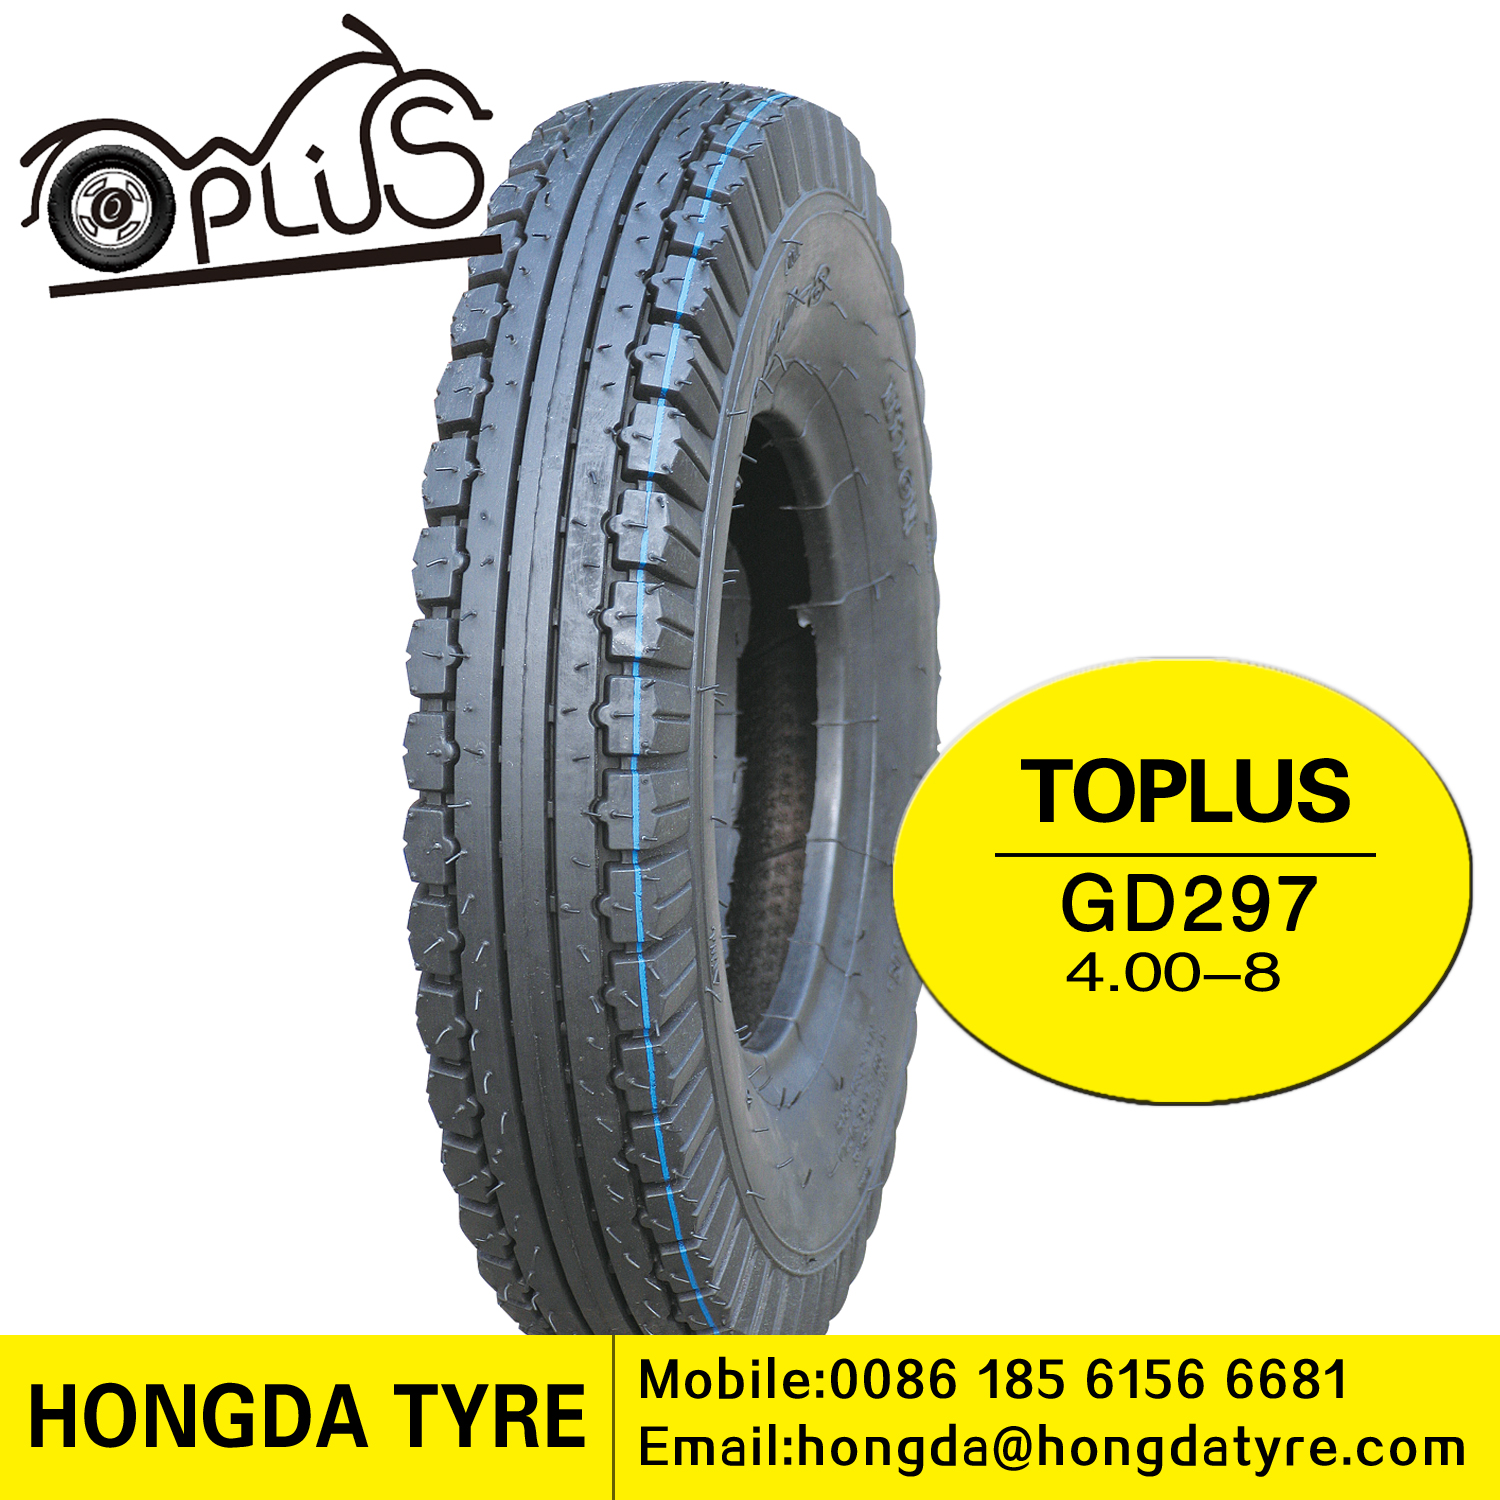 Motorcycle tyre GD297